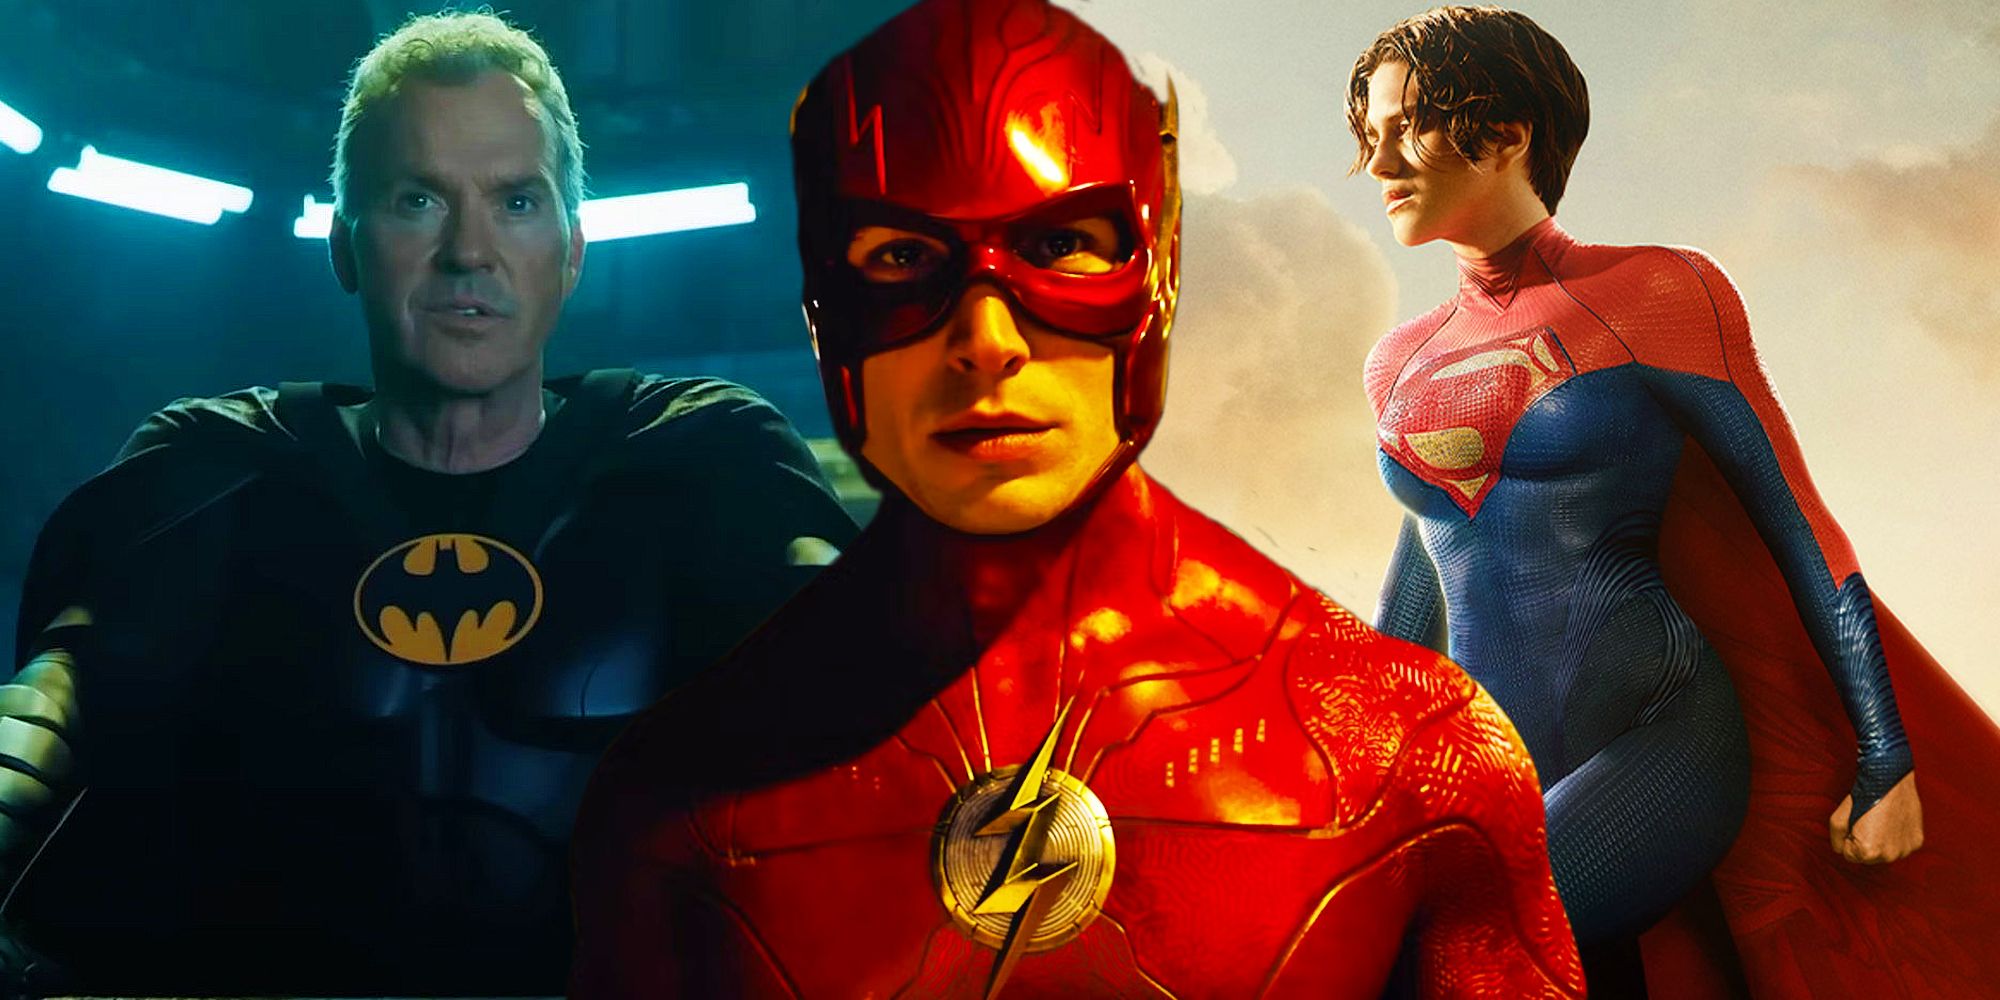 The Flash, Michael Keaton's Batman, and Sasha Calle's Supergirl as seen in The Flash movie